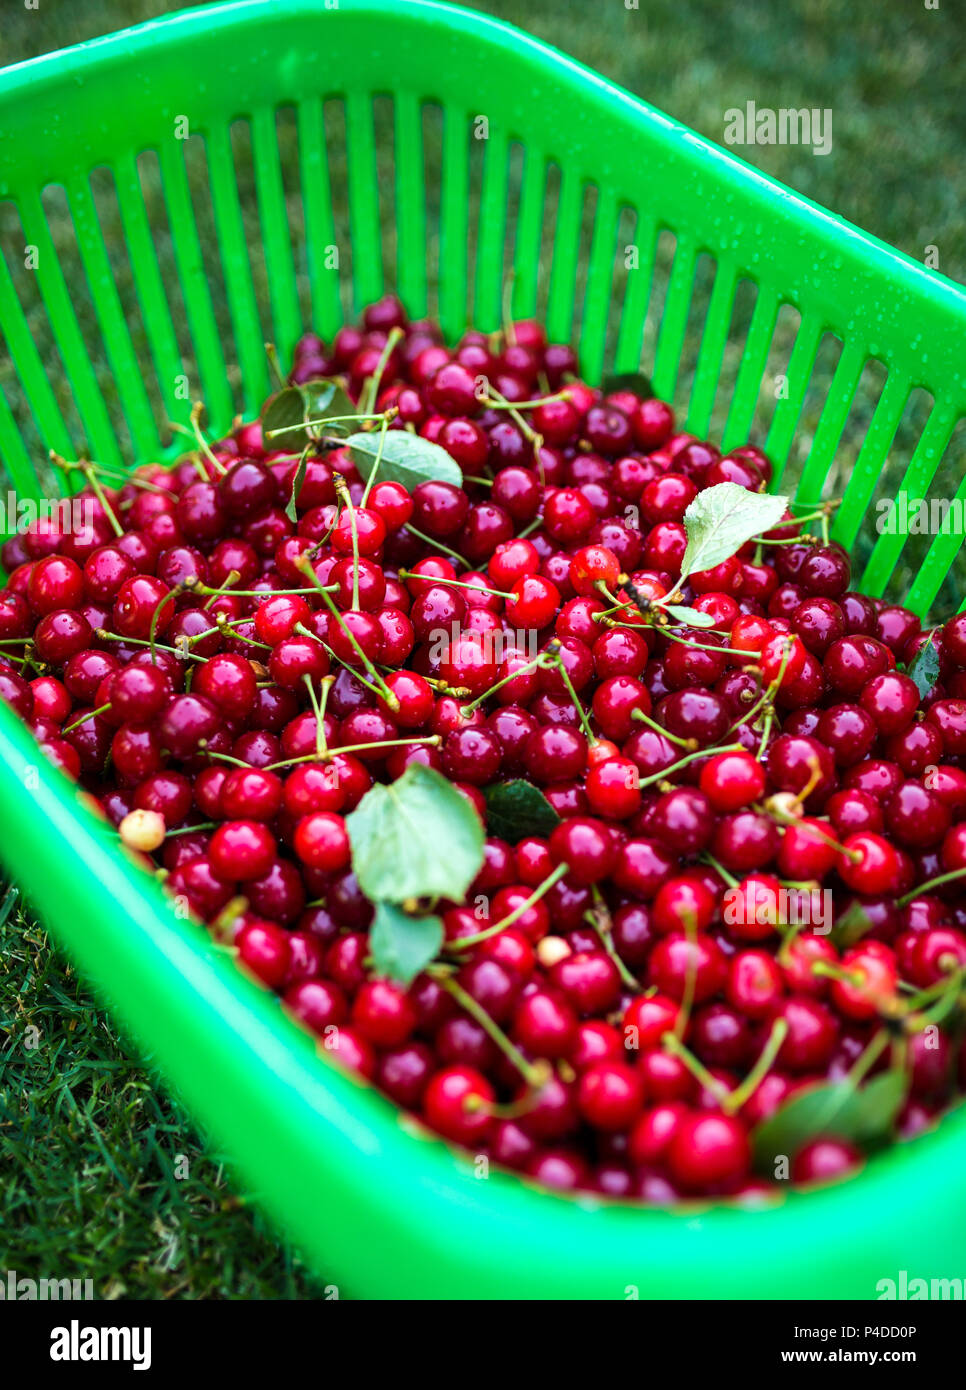 Ripe cherries with stalks and leaves in basket after harvest Stock Photo